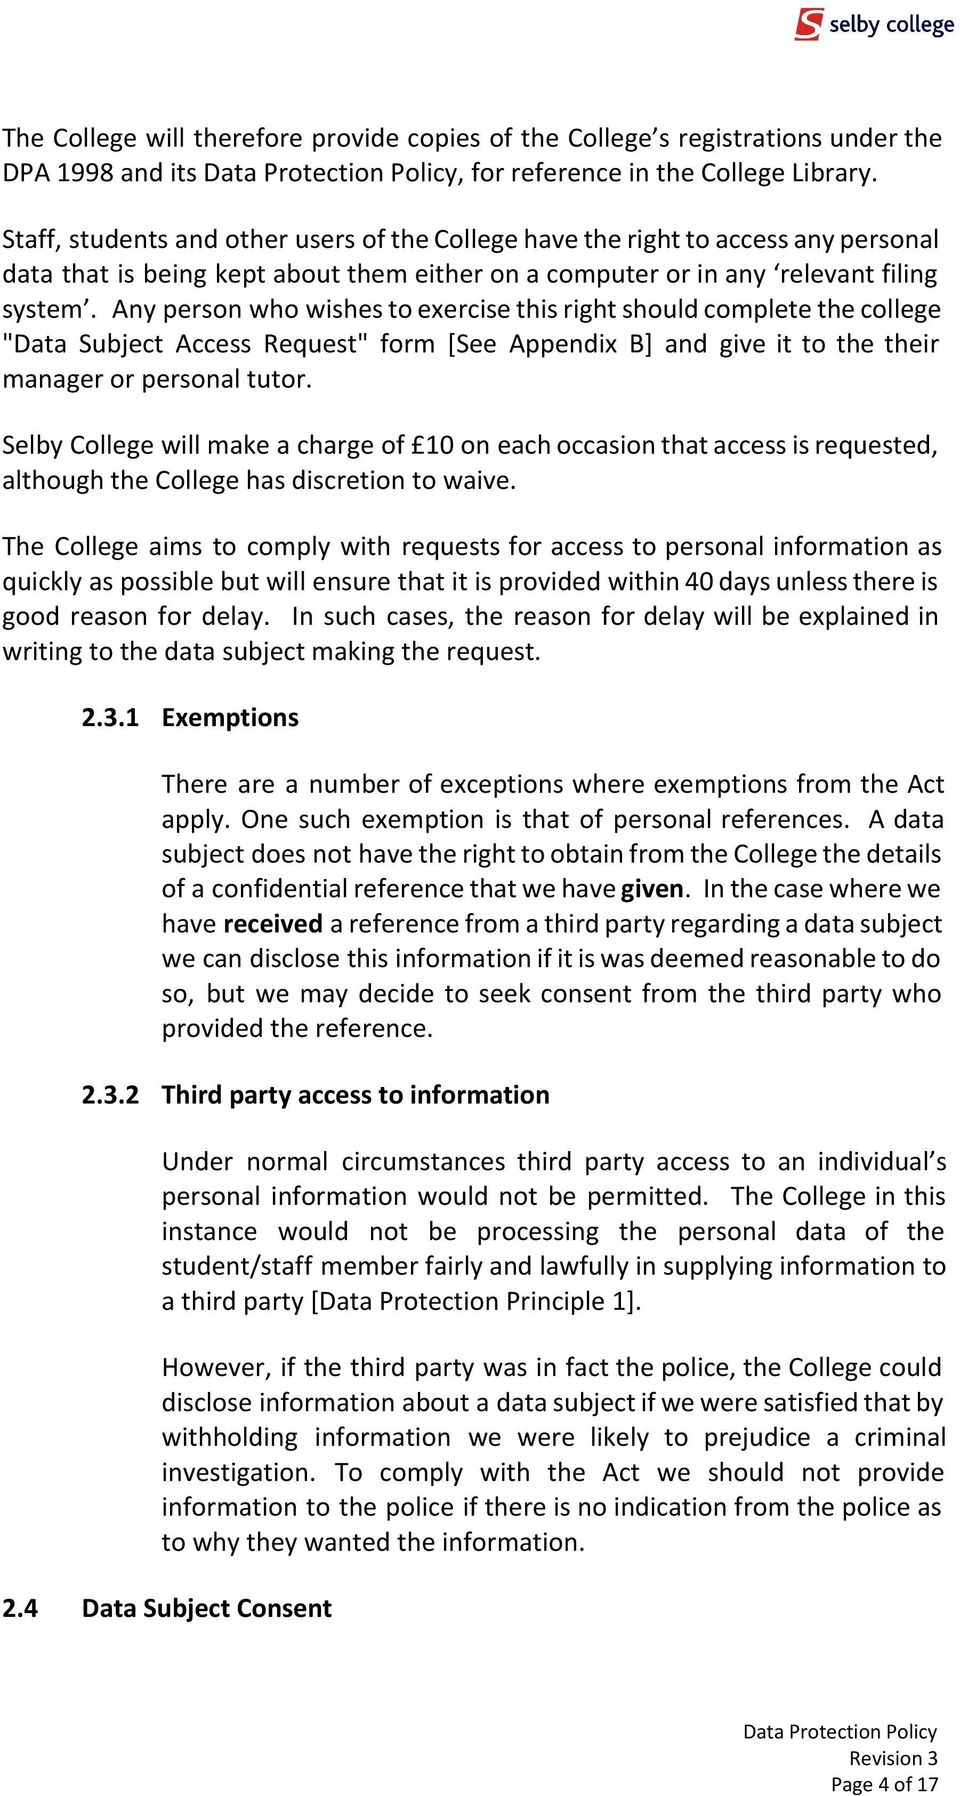 Any person who wishes to exercise this right should complete the college "Data Subject Access Request" form [See Appendix B] and give it to the their manager or personal tutor.